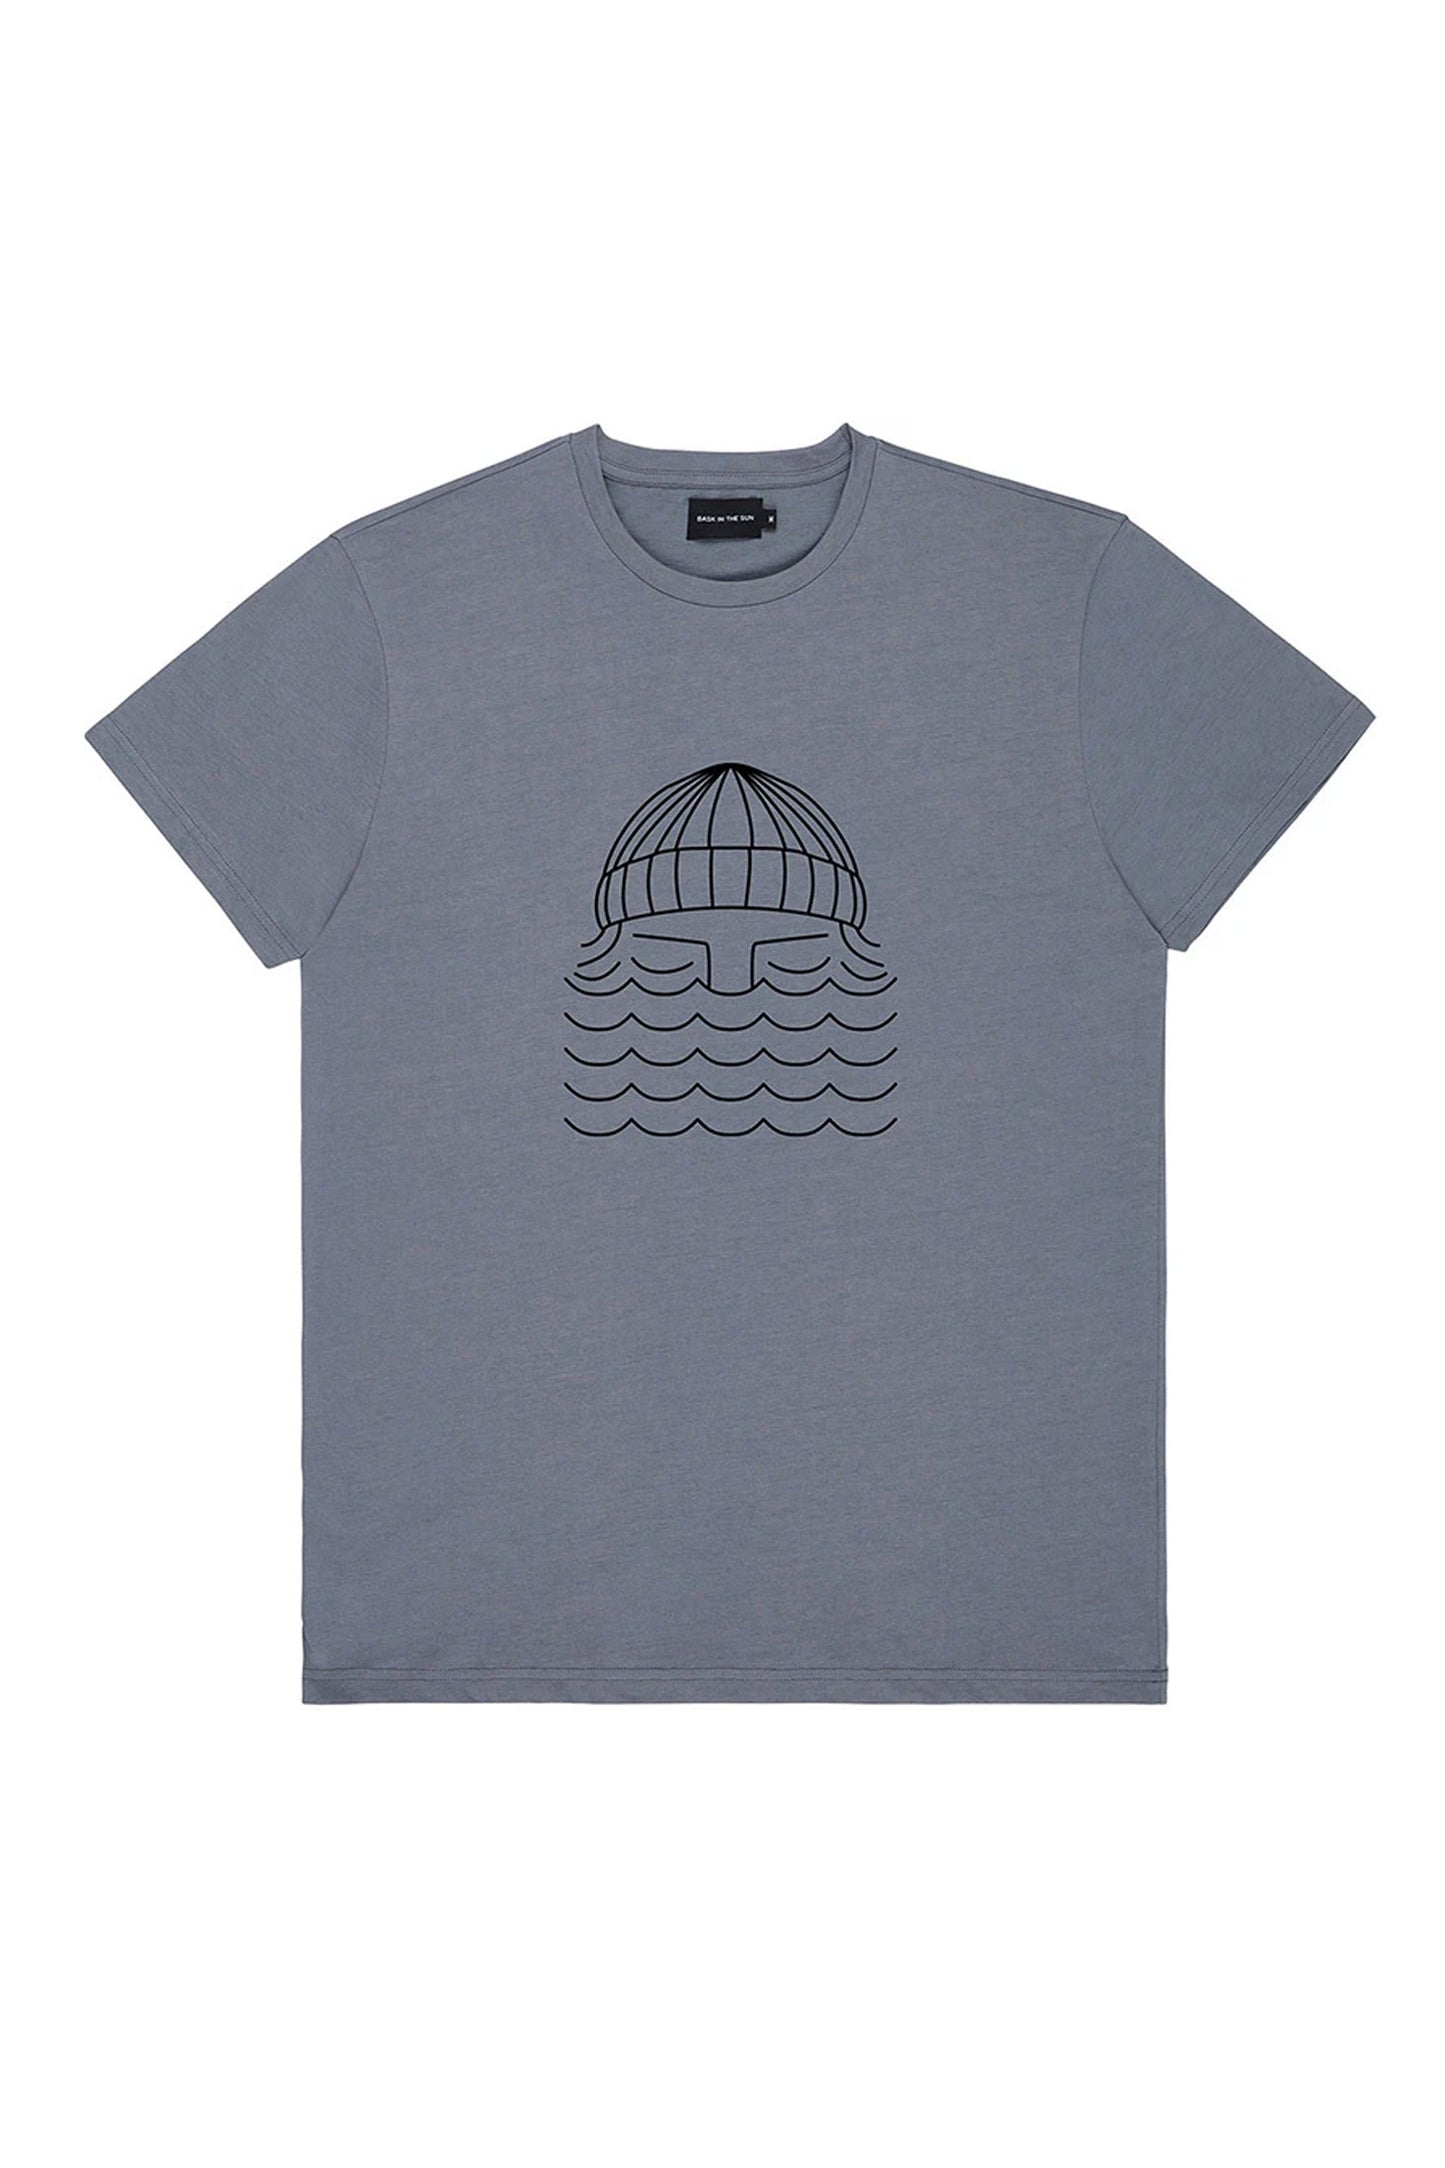 Pukas-Surf-Shop-bask-in-the-sun-man-tee-to-the-sea-zinc